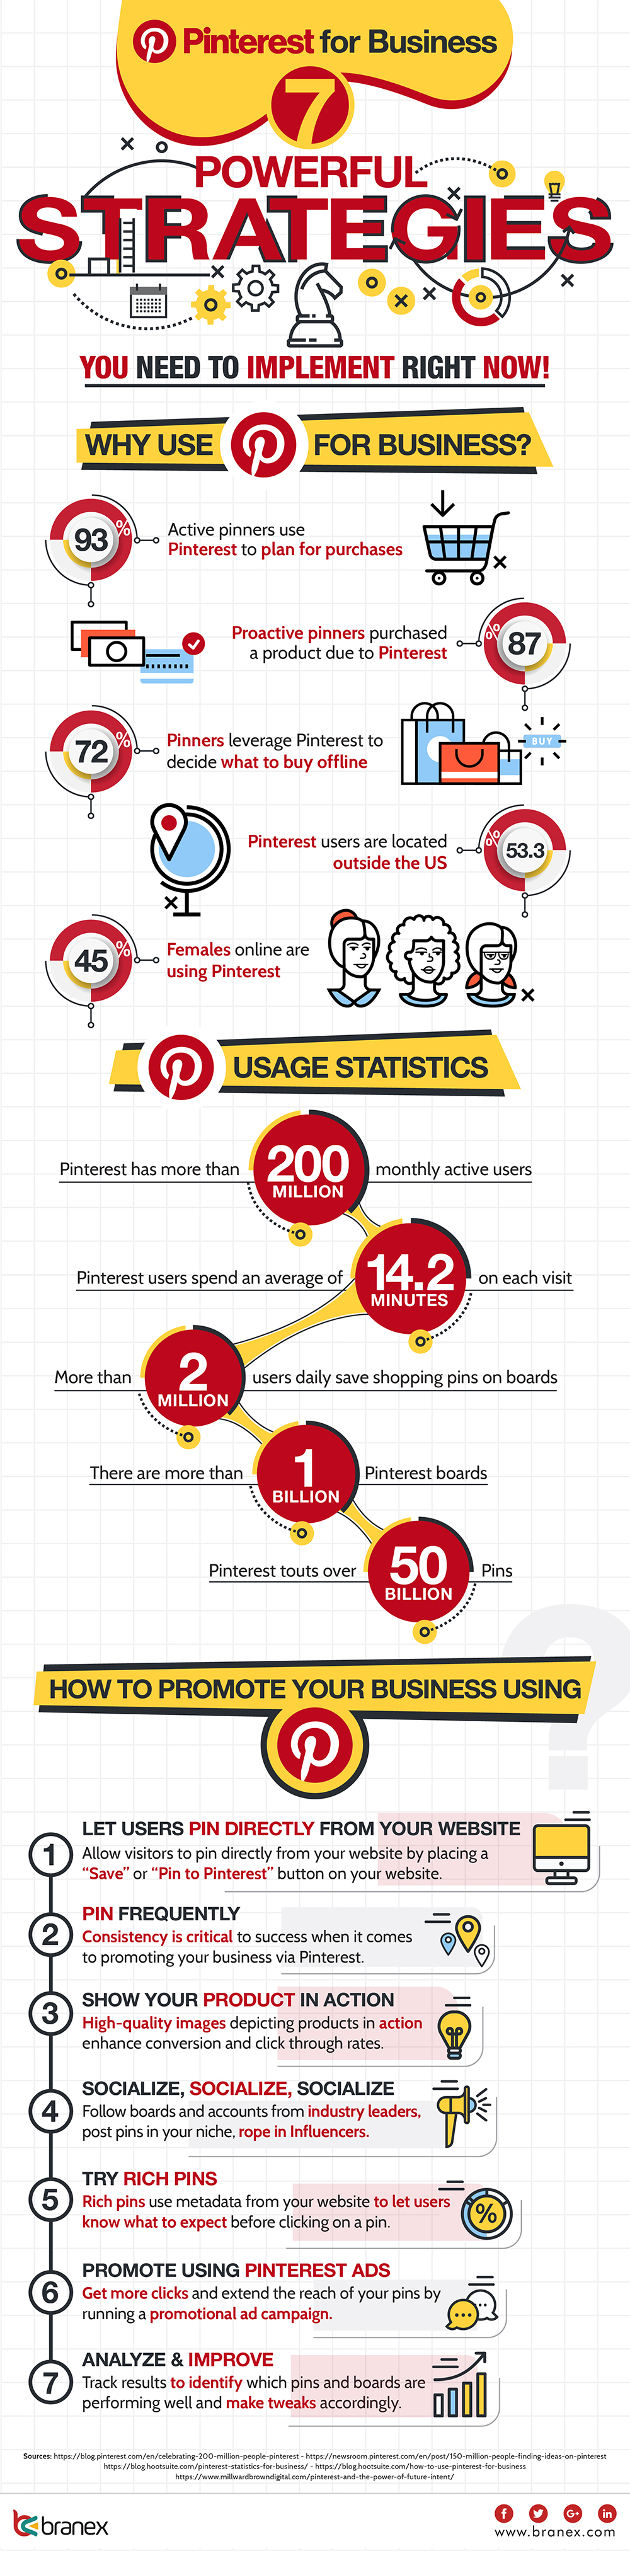 Pinterest for Business: Seven Helpful Tips [Infographic]